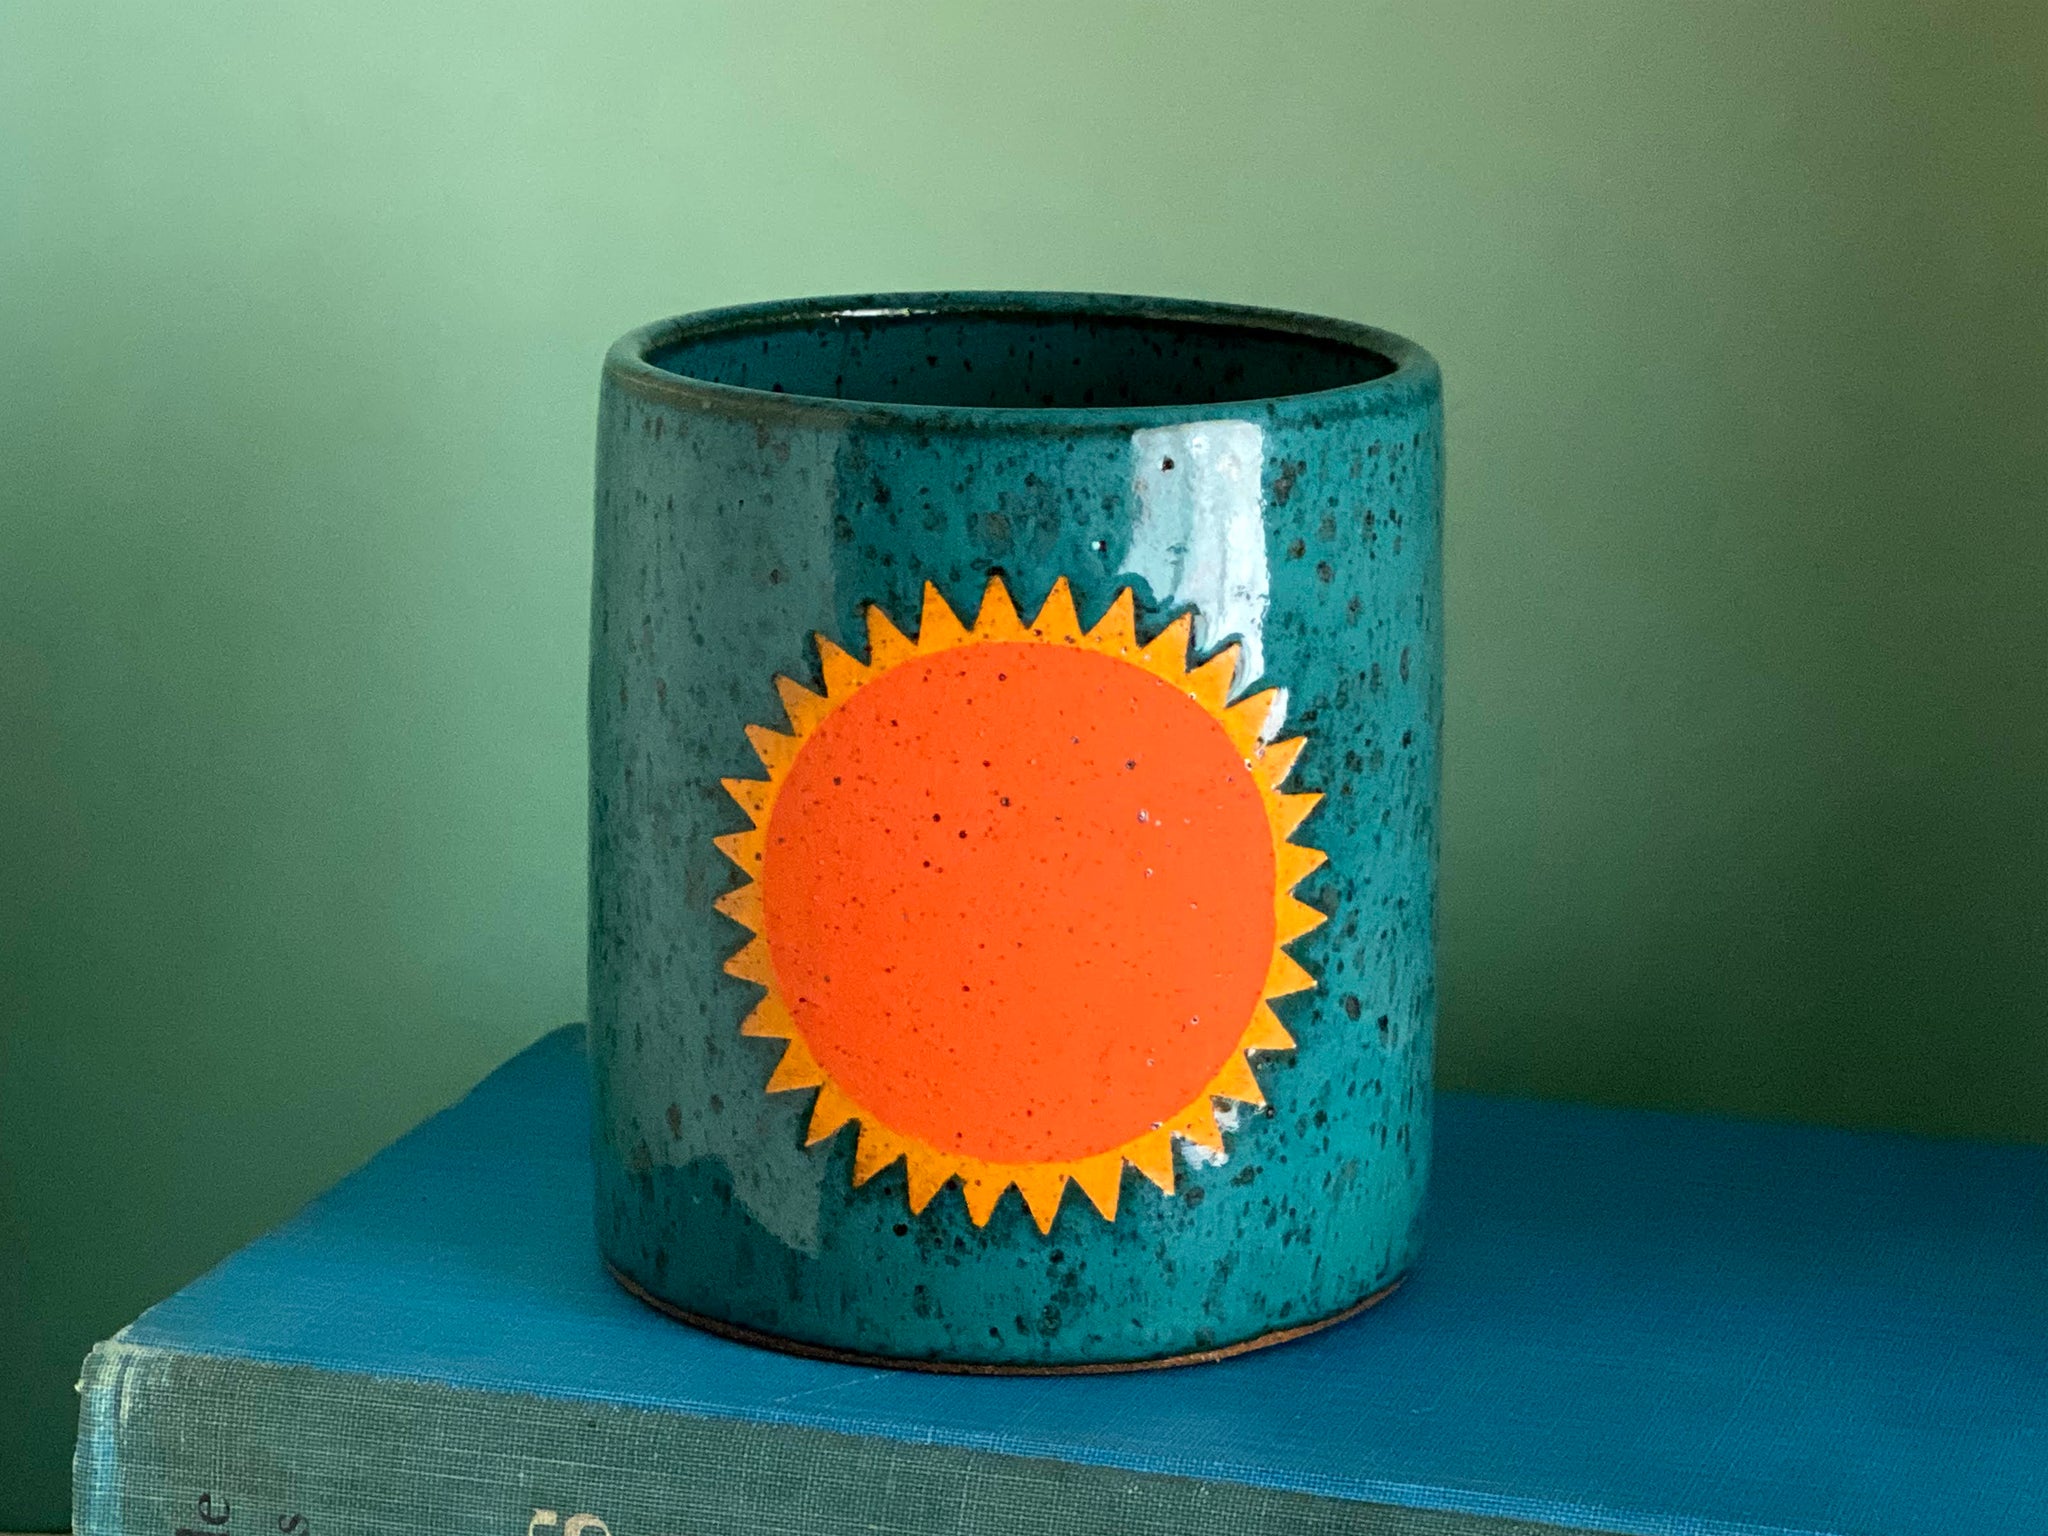 Pre-Order: "Soleil" Sun Cup / Tumbler - Orange and Turquoise